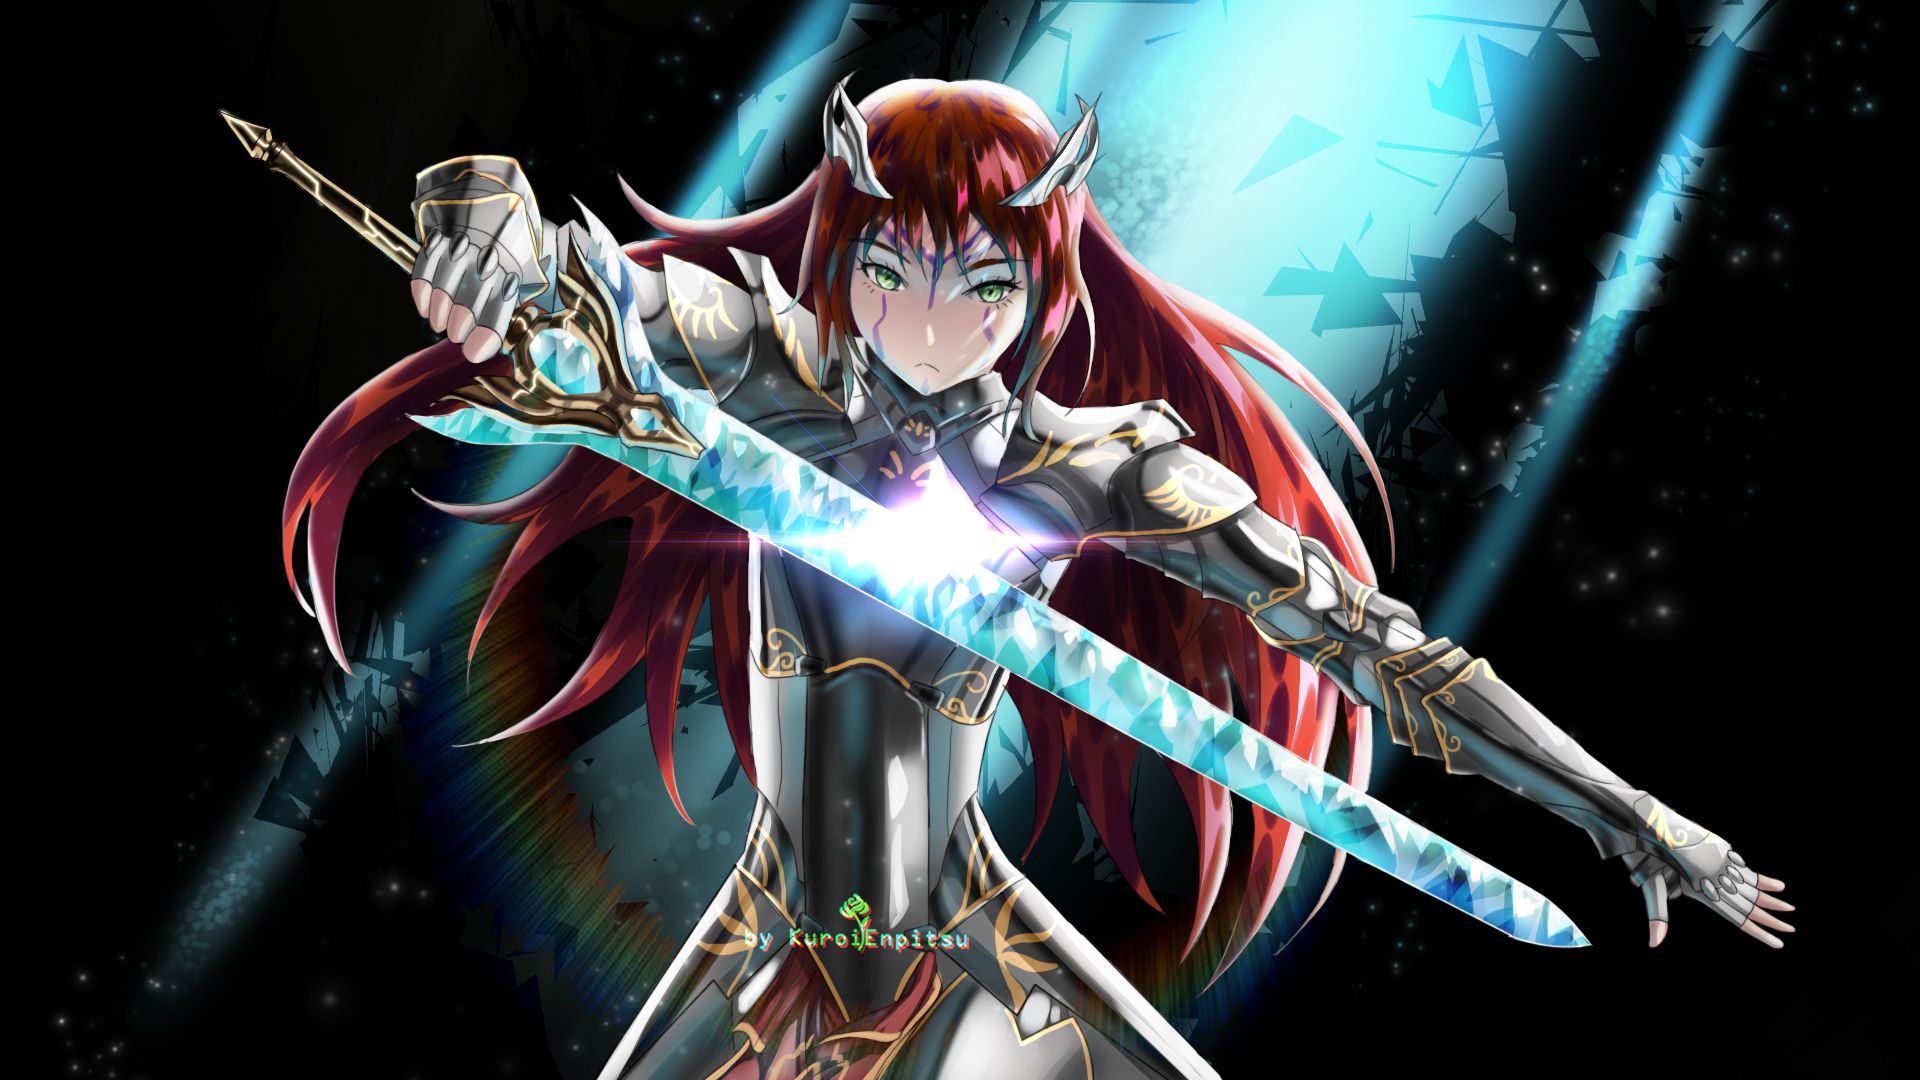 anime girl with red hair and red eyes and sword